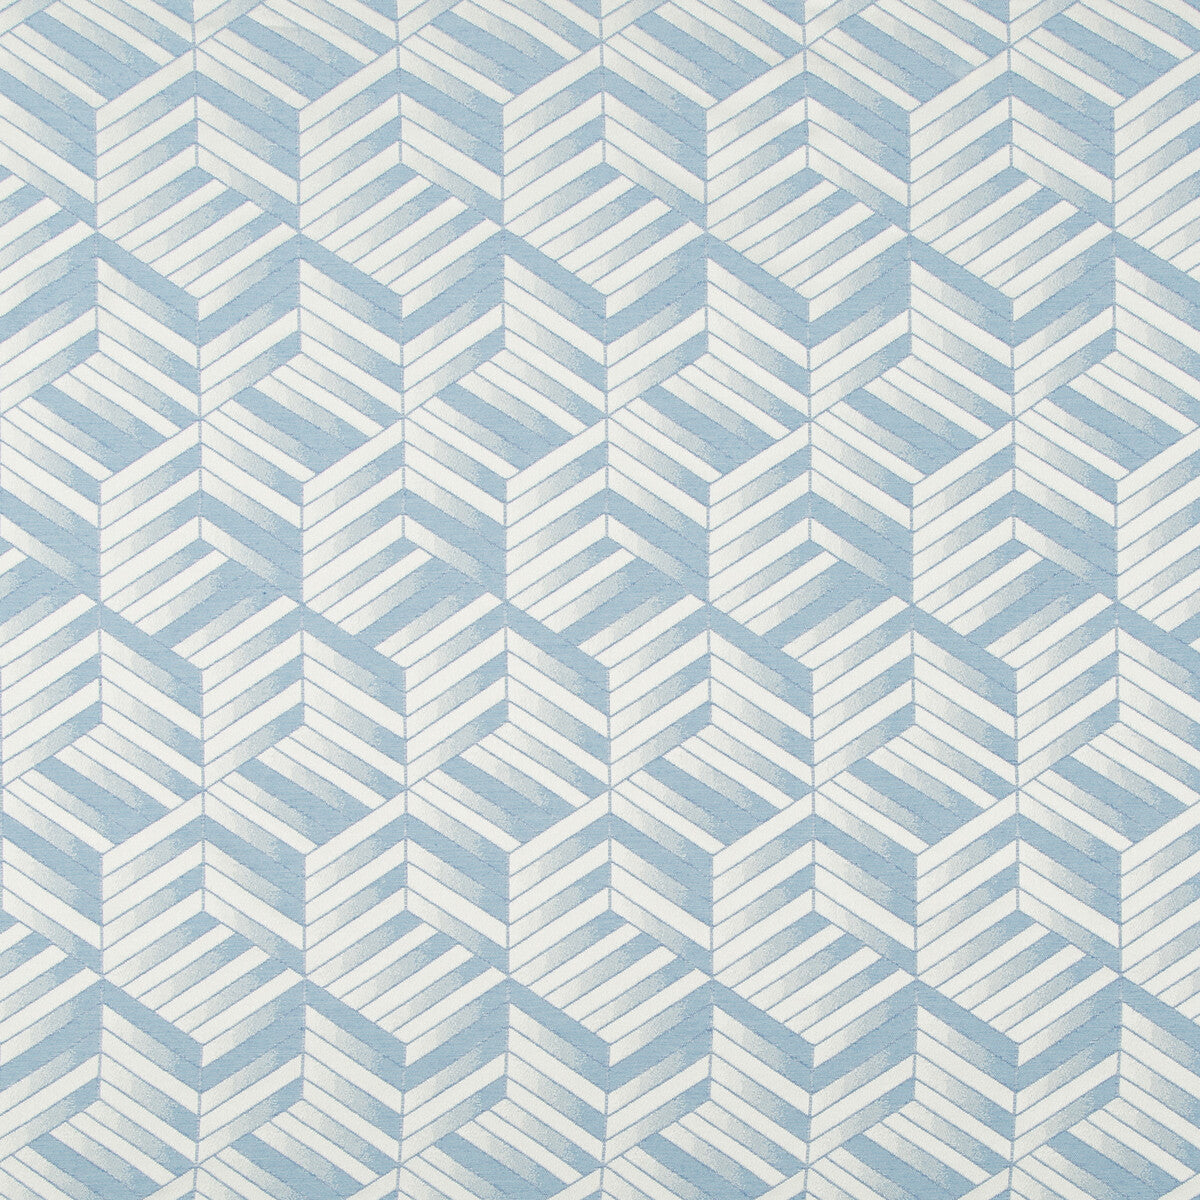 Wayfarer fabric in atlantis color - pattern 4799.15.0 - by Kravet Contract in the Kravet Cruise collection